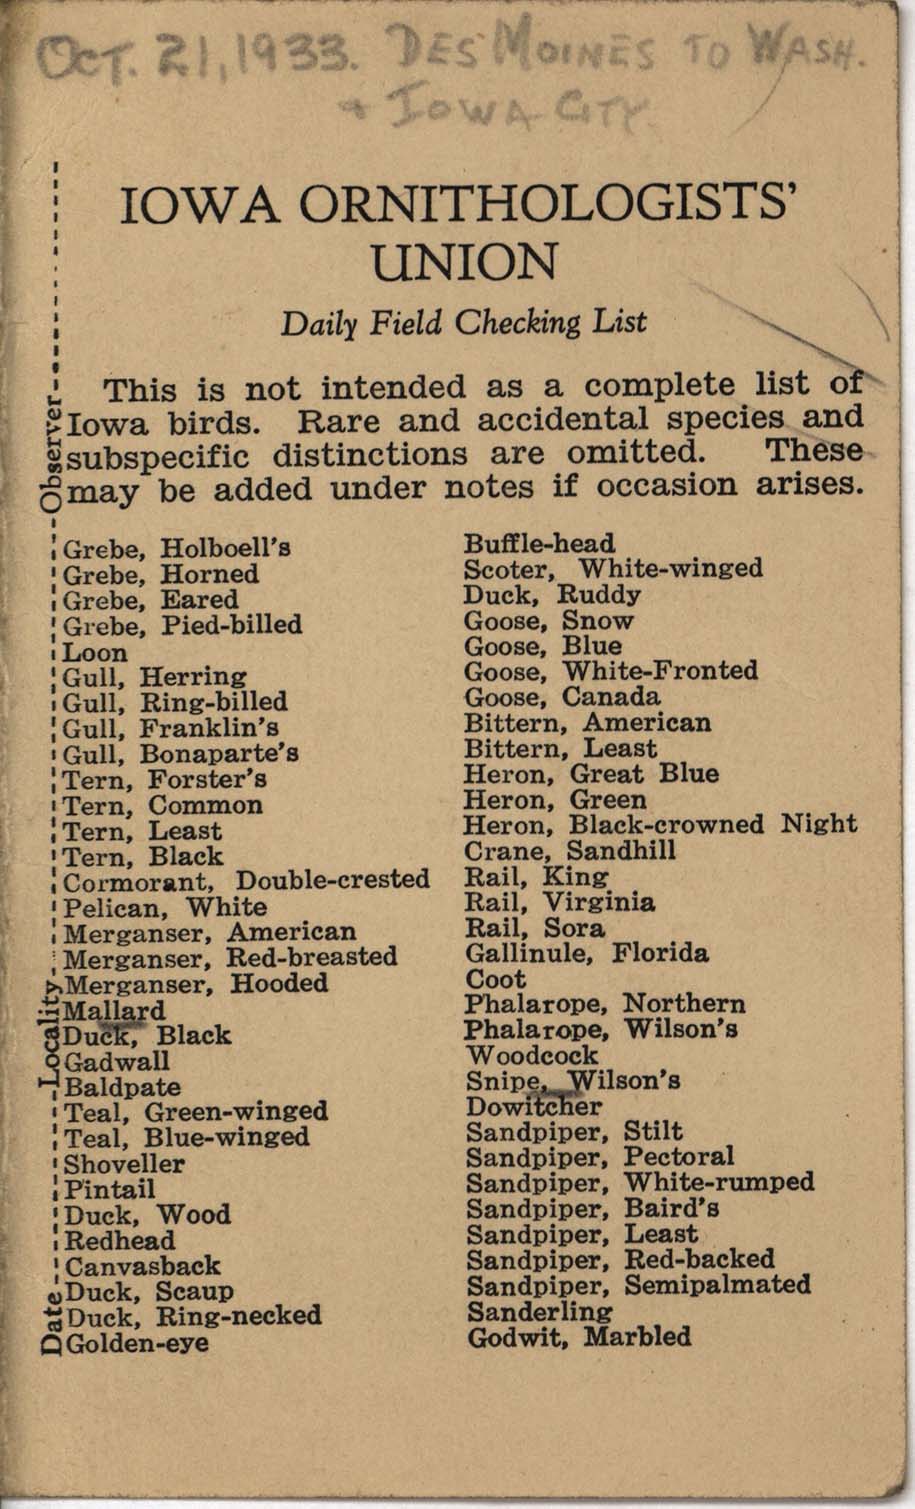 Daily field checking list, Philip DuMont, October 21, 1933